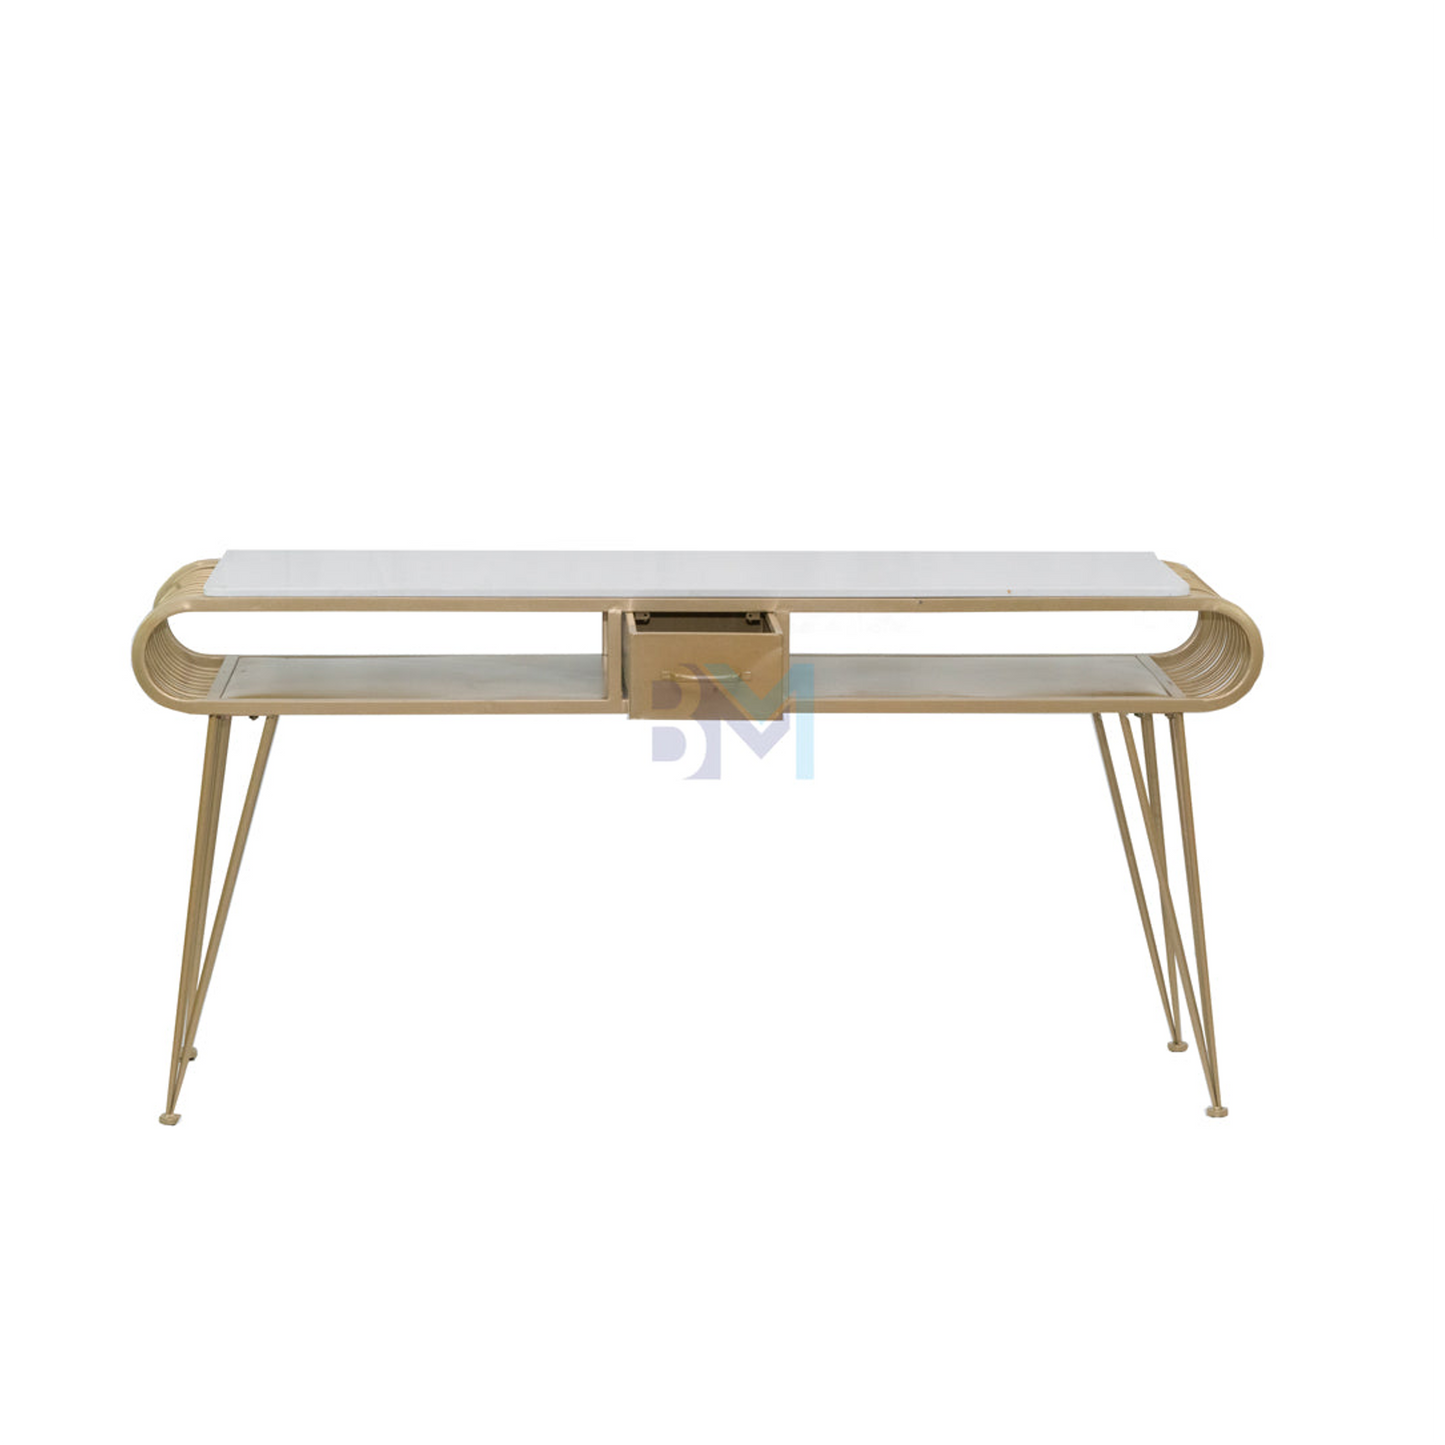 Double manicure table in gold metal with marble-like ceramic and drawers